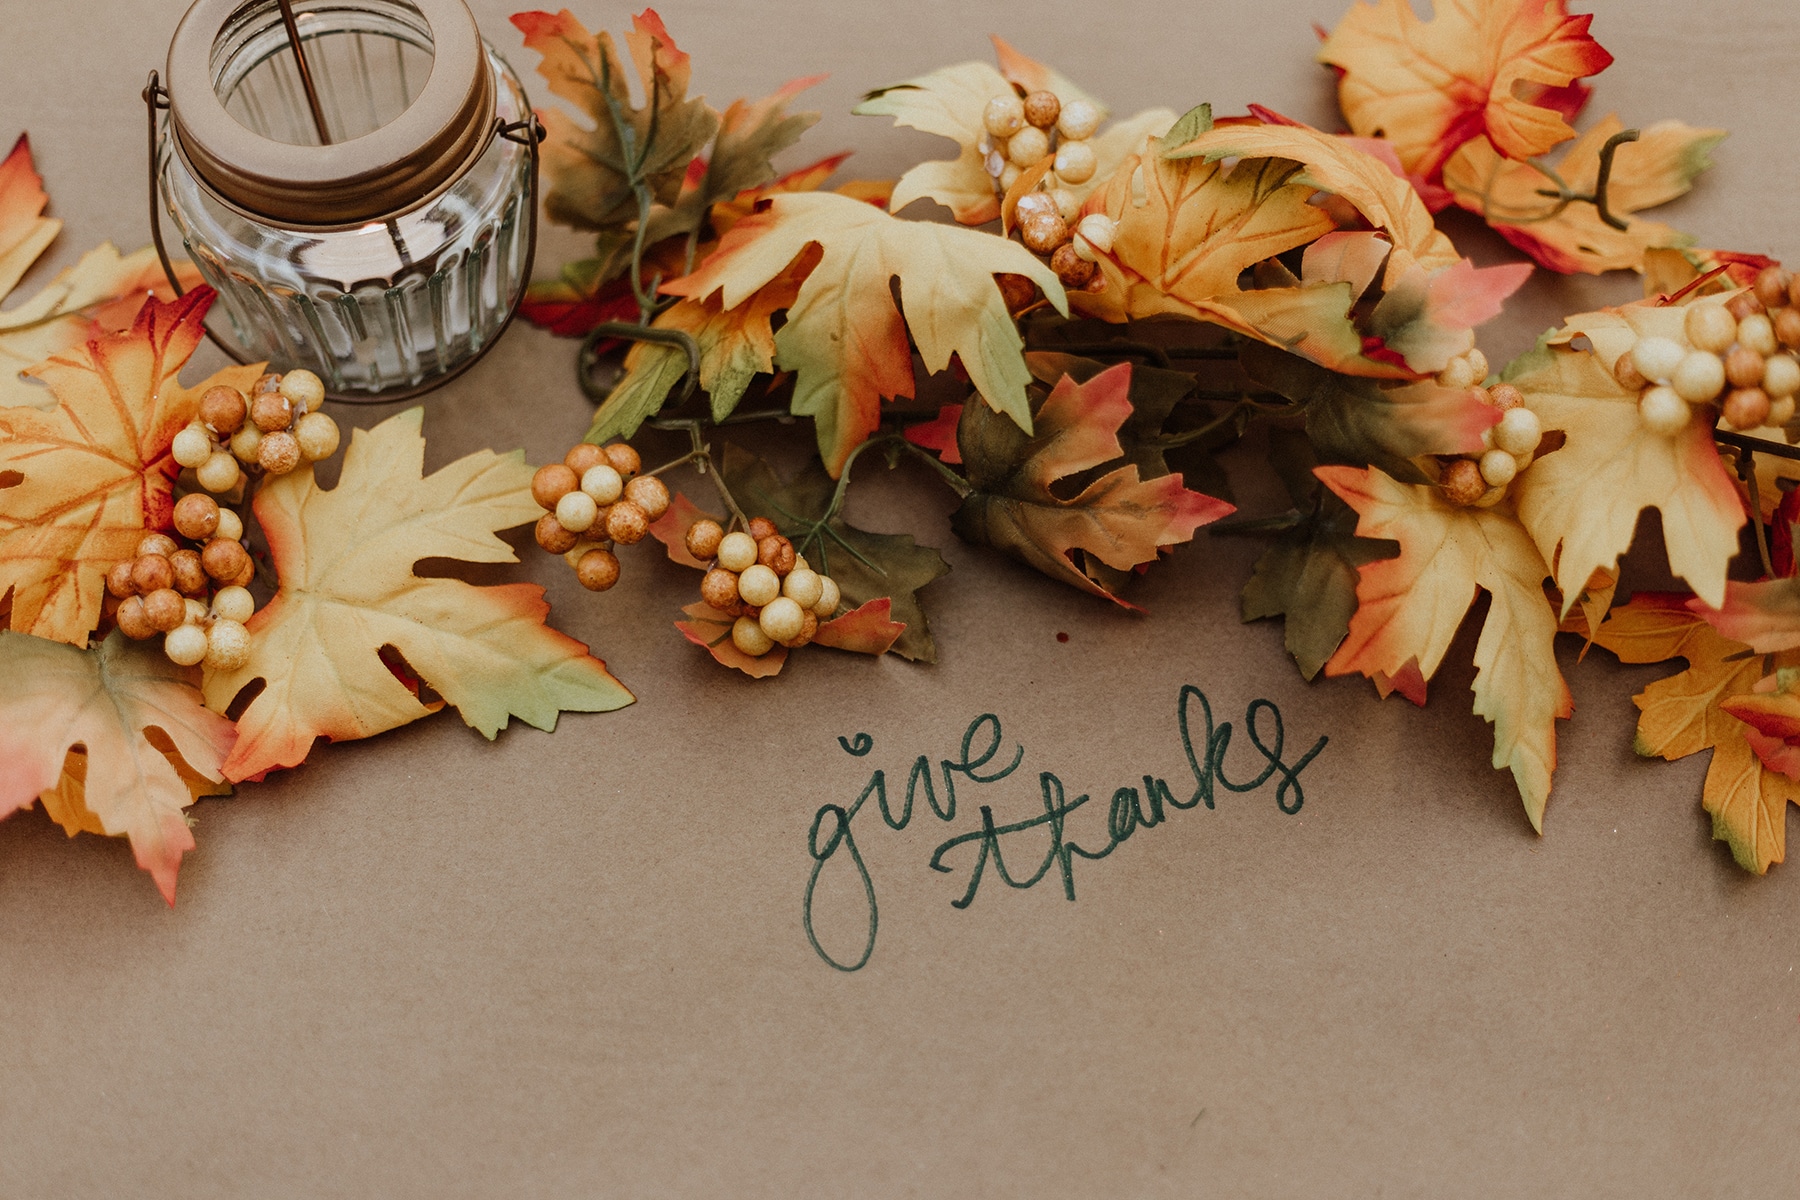 autumn leaves and small candle on brown paper that says give thanks